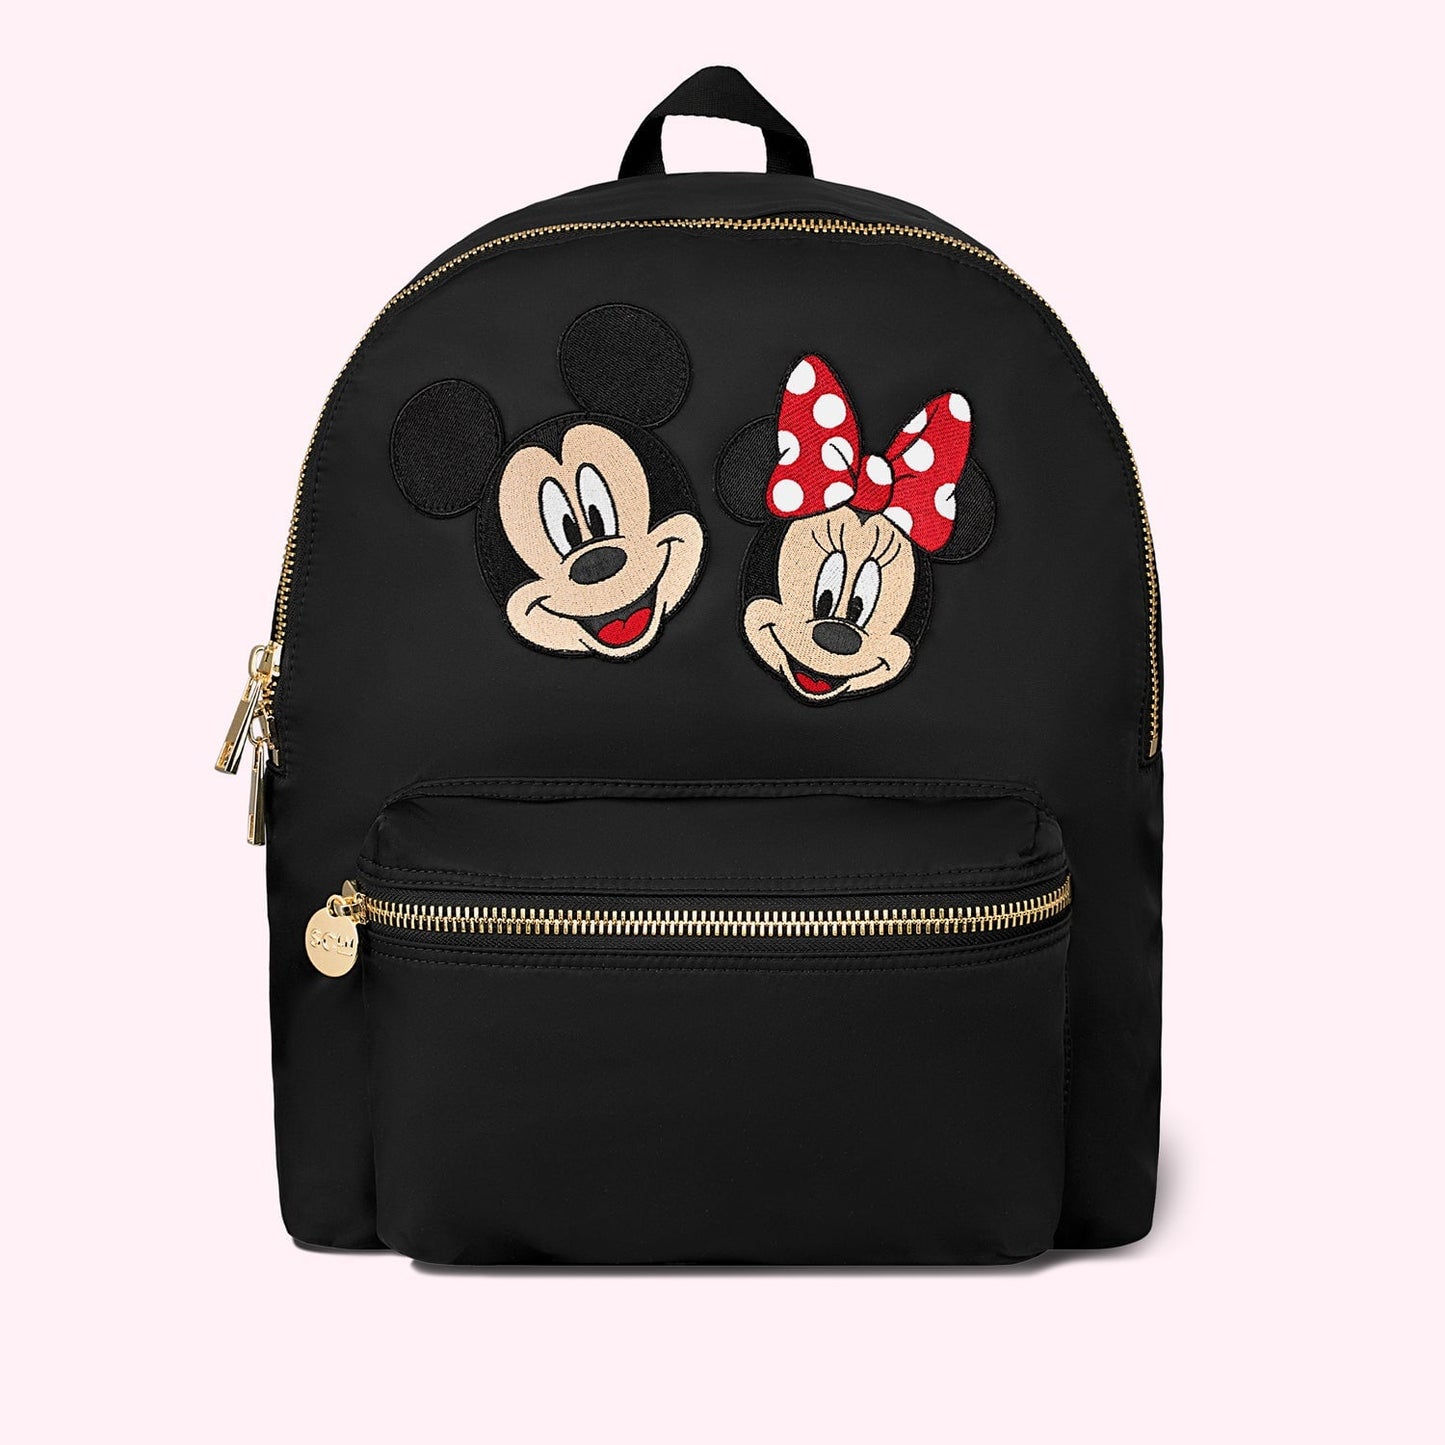 Classic Noir Backpack with Large Mickey & Minnie Patch